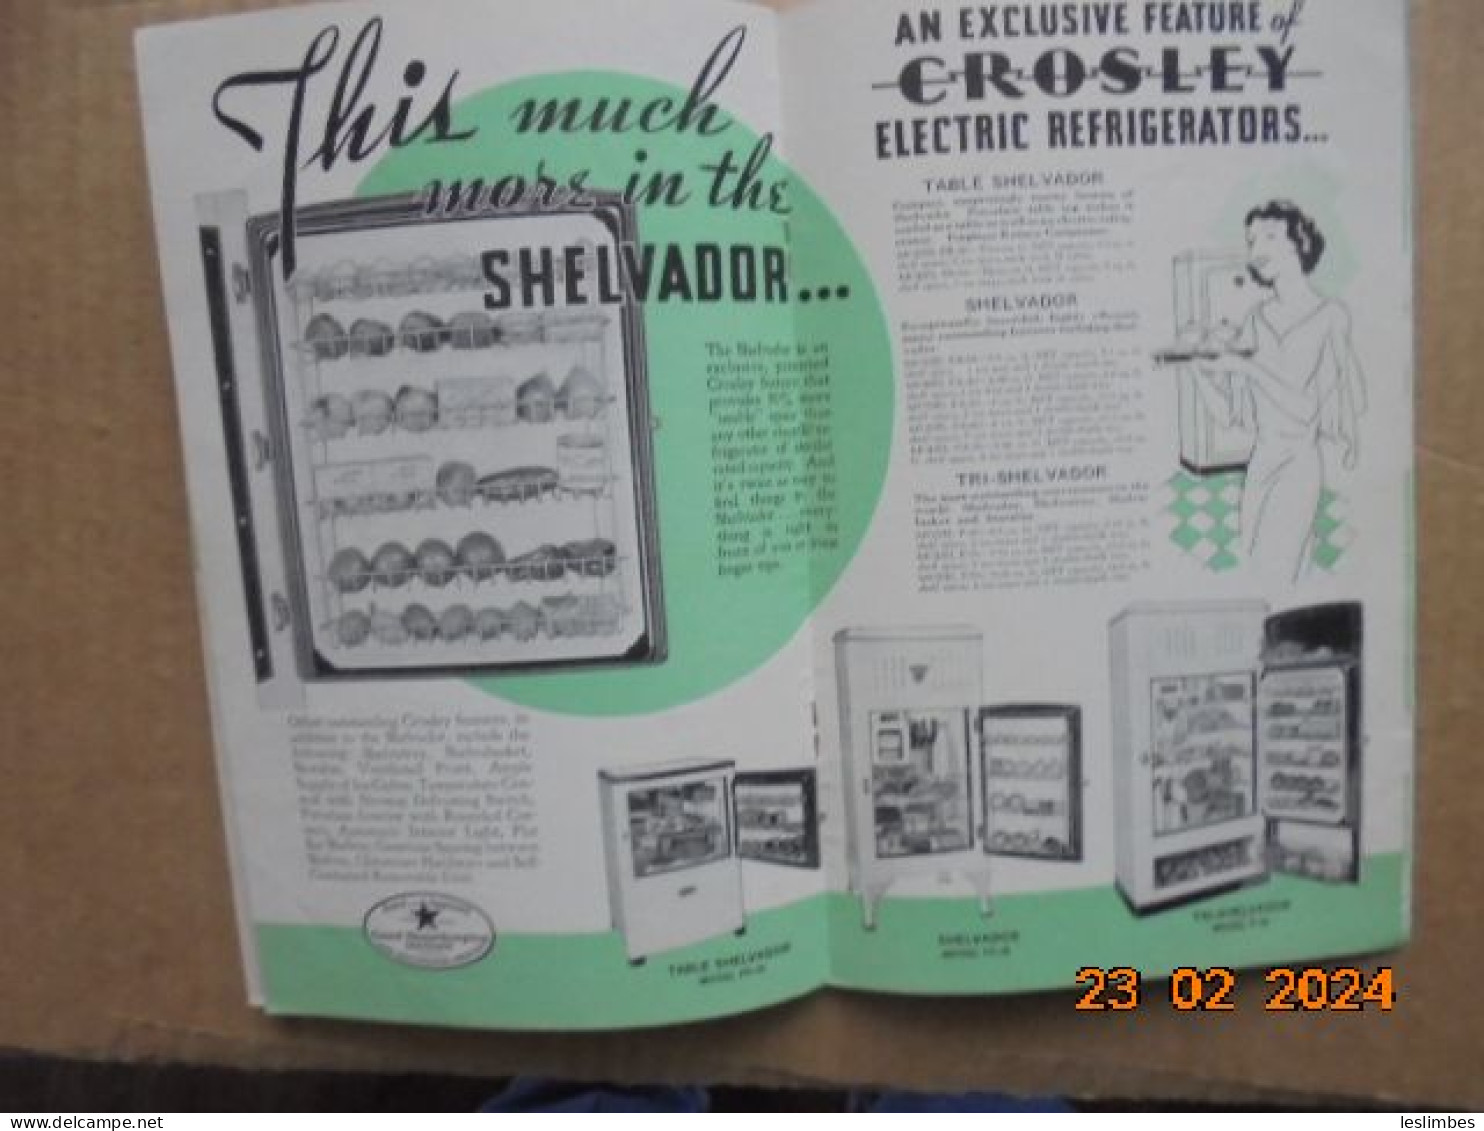 Delicious Frozen Dishes Made In The Crosley Shelvador And Tri-Shelvador Electric Refrigerator - Americana